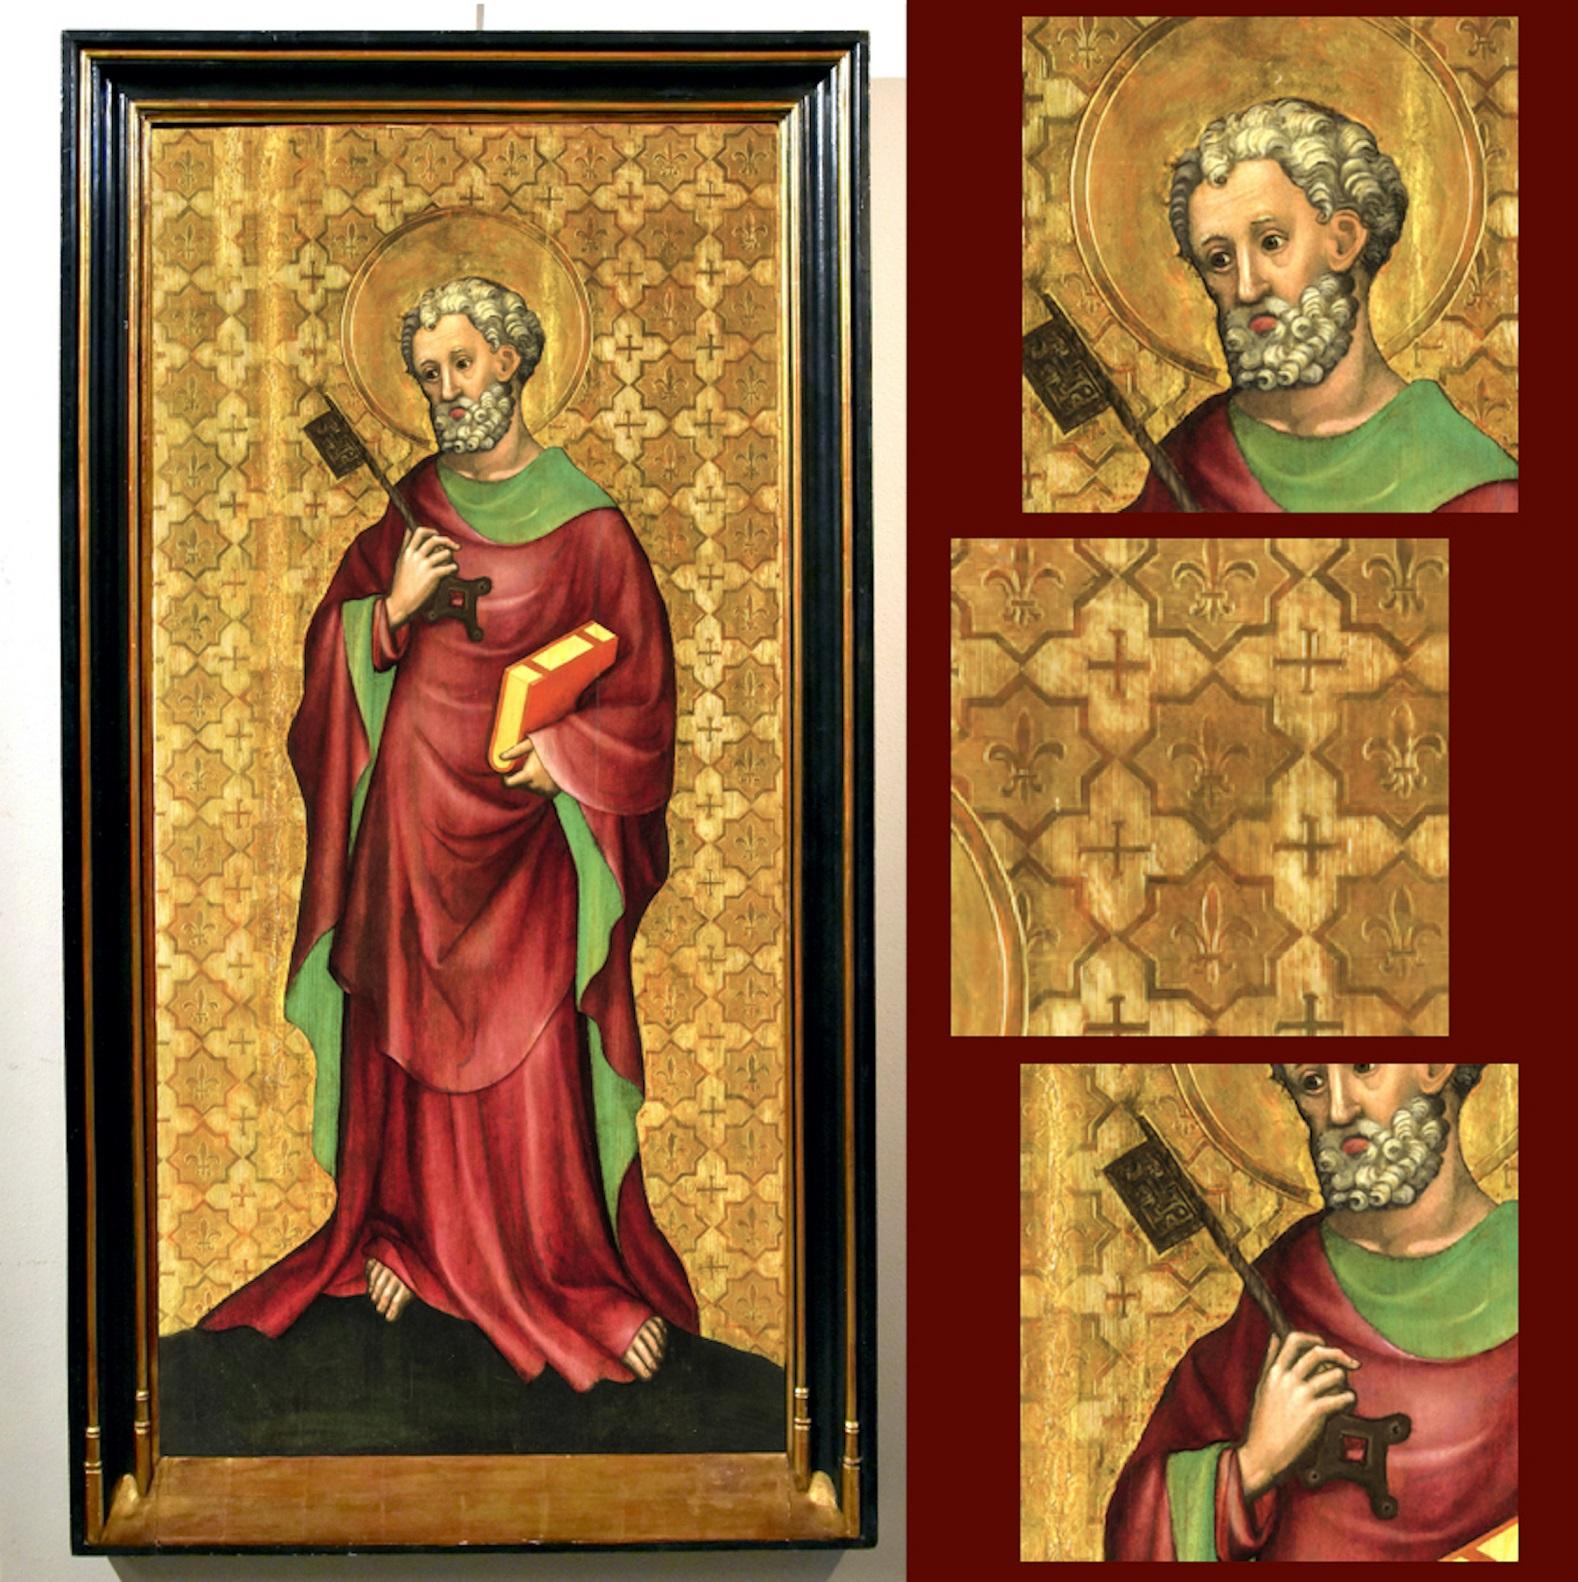 St.peter Oil on table Gold 15th Century Old master Germany Gothic Religious Art - Painting by Stephan Lochner (Meersburg, around 1400 - Cologne 1451)